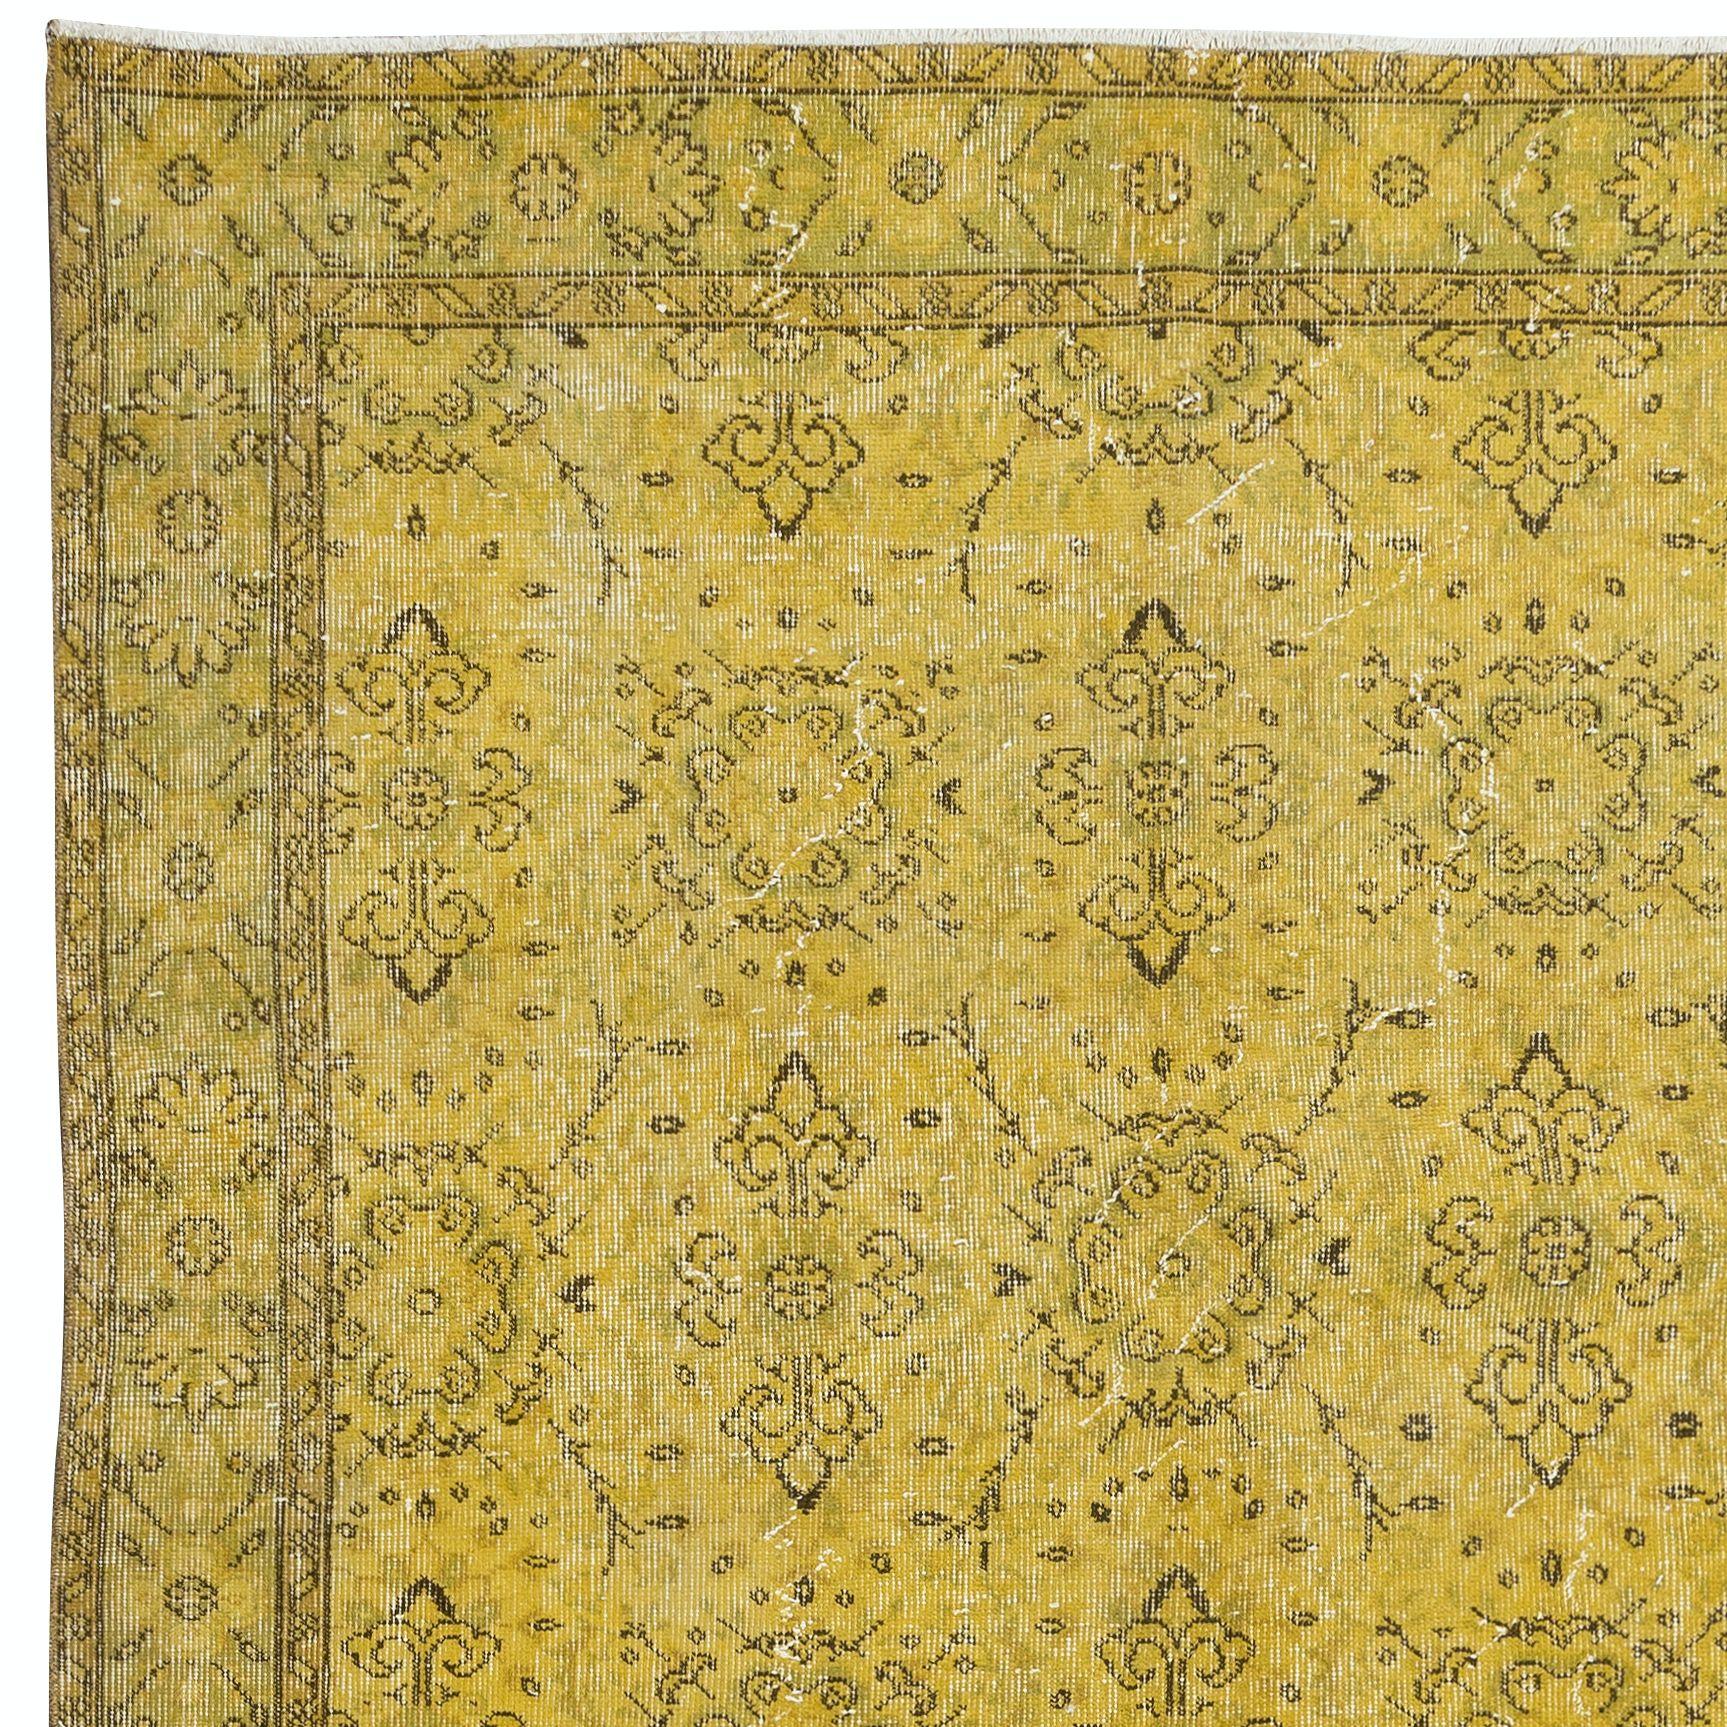 5.5x9.5 Ft Modern Handmade Floral Turkish Area Rug, Yellow Upcycled Carpet In Good Condition For Sale In Philadelphia, PA